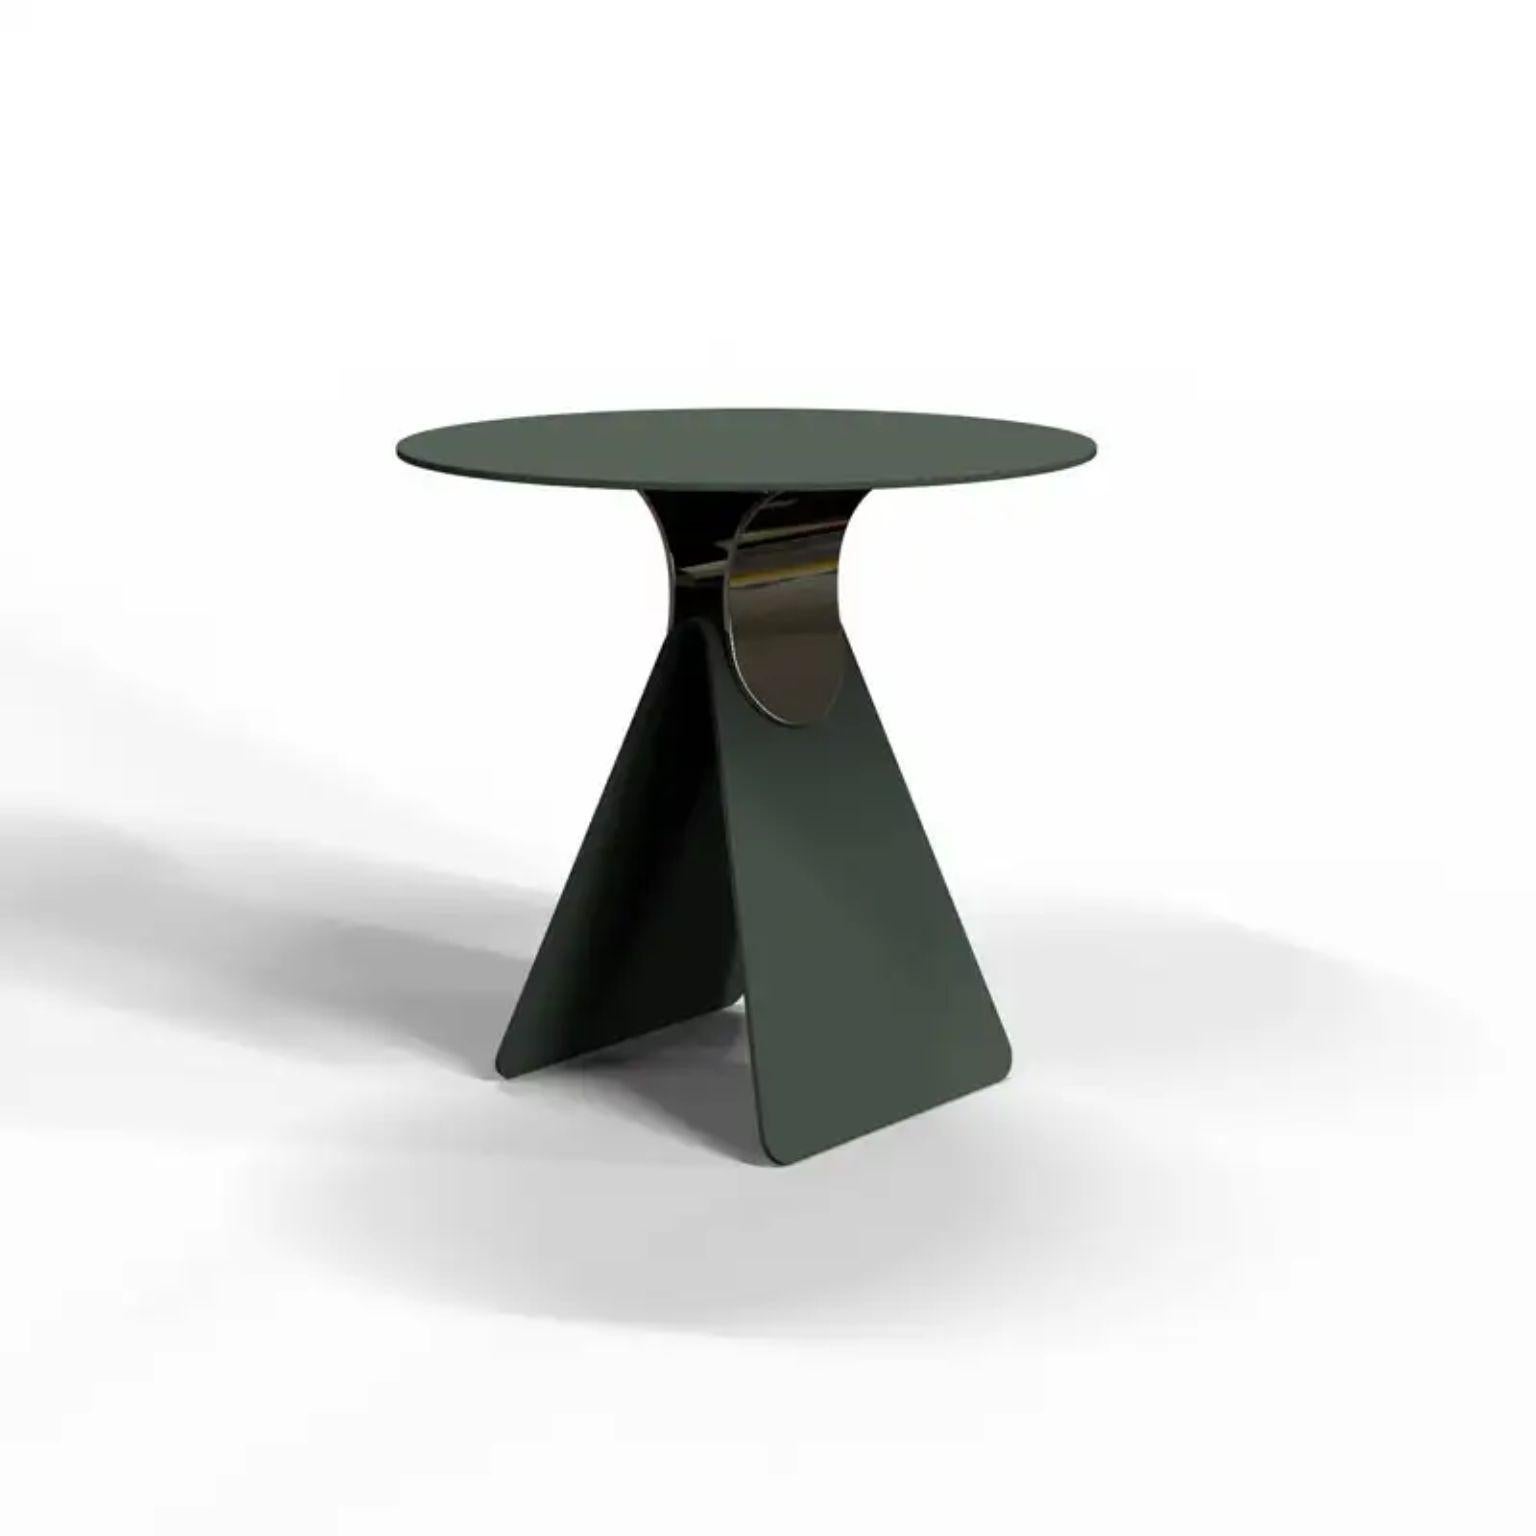 Cipputi dark green coffee table by Mason Editions
Designed by Quaglio Simonelli.
Dimensions: Ø 50 cm x H 48 cm.
Materials: metal.

Available in different colors. 

Cipputi is a side table designed by metal sheets that fold and assemble to